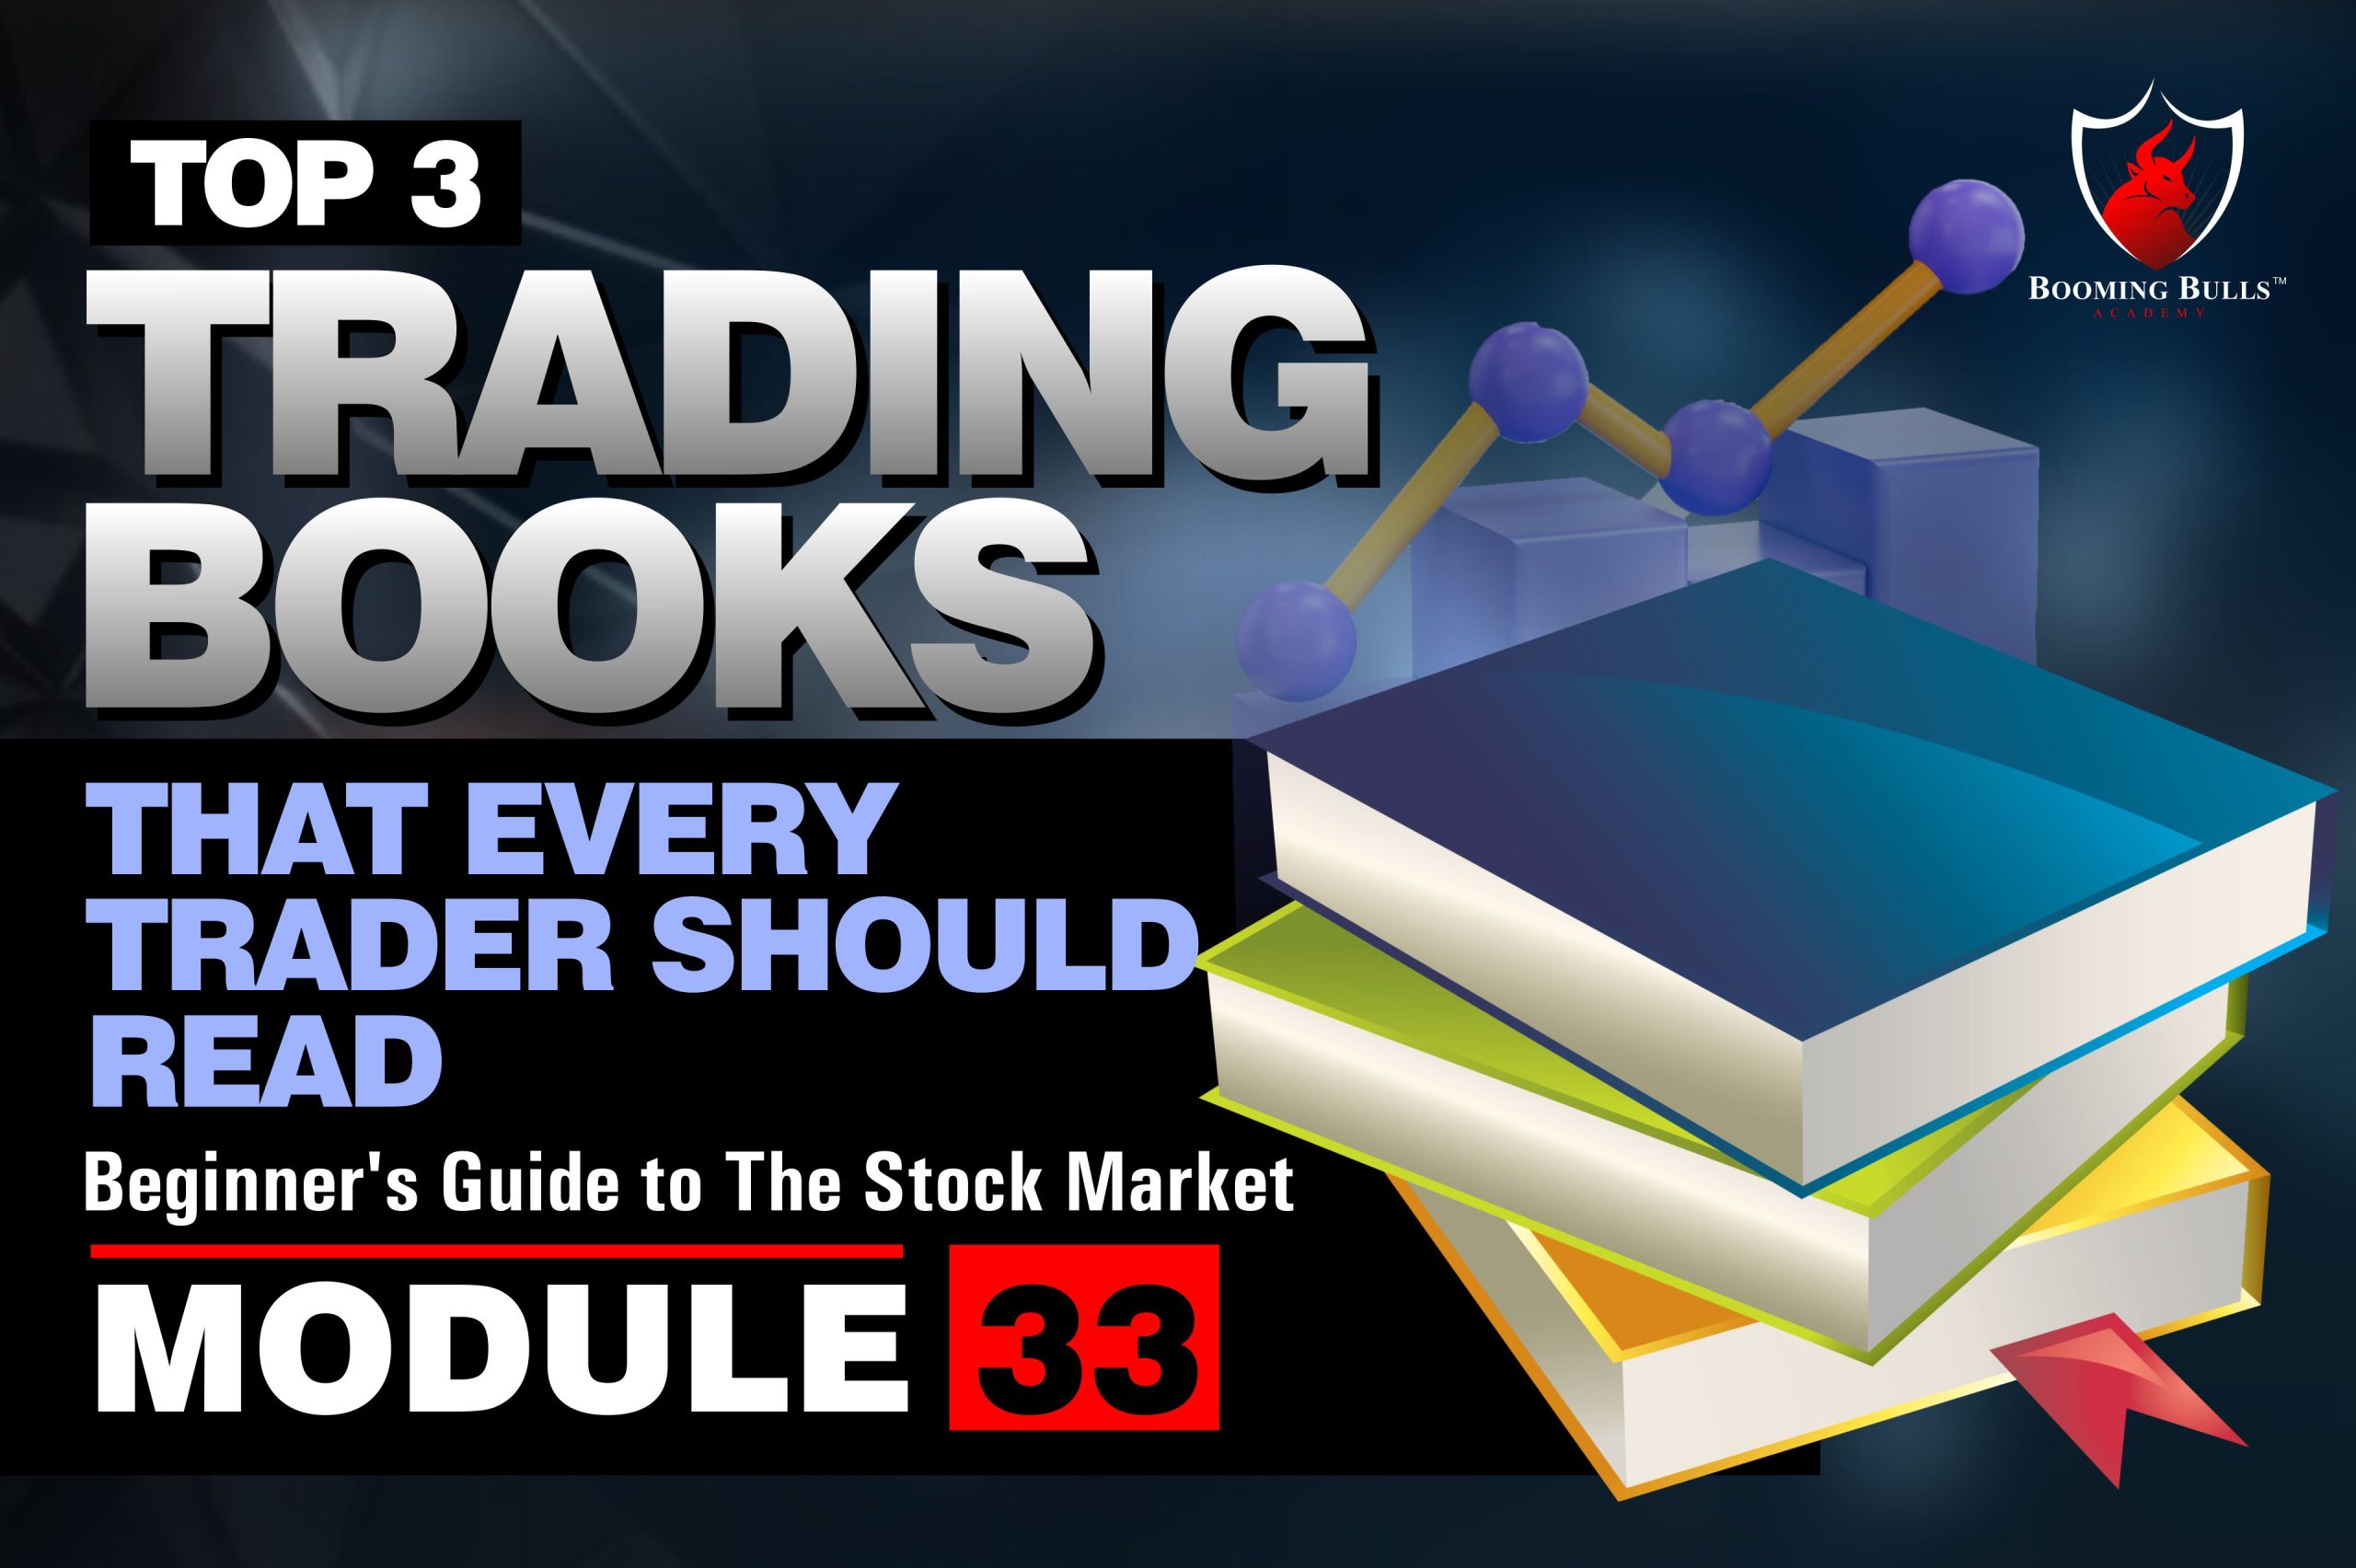 Top 3 Trading Books That Every Trader Should Read | Beginner’s Guide to The Stock Market | Module 33